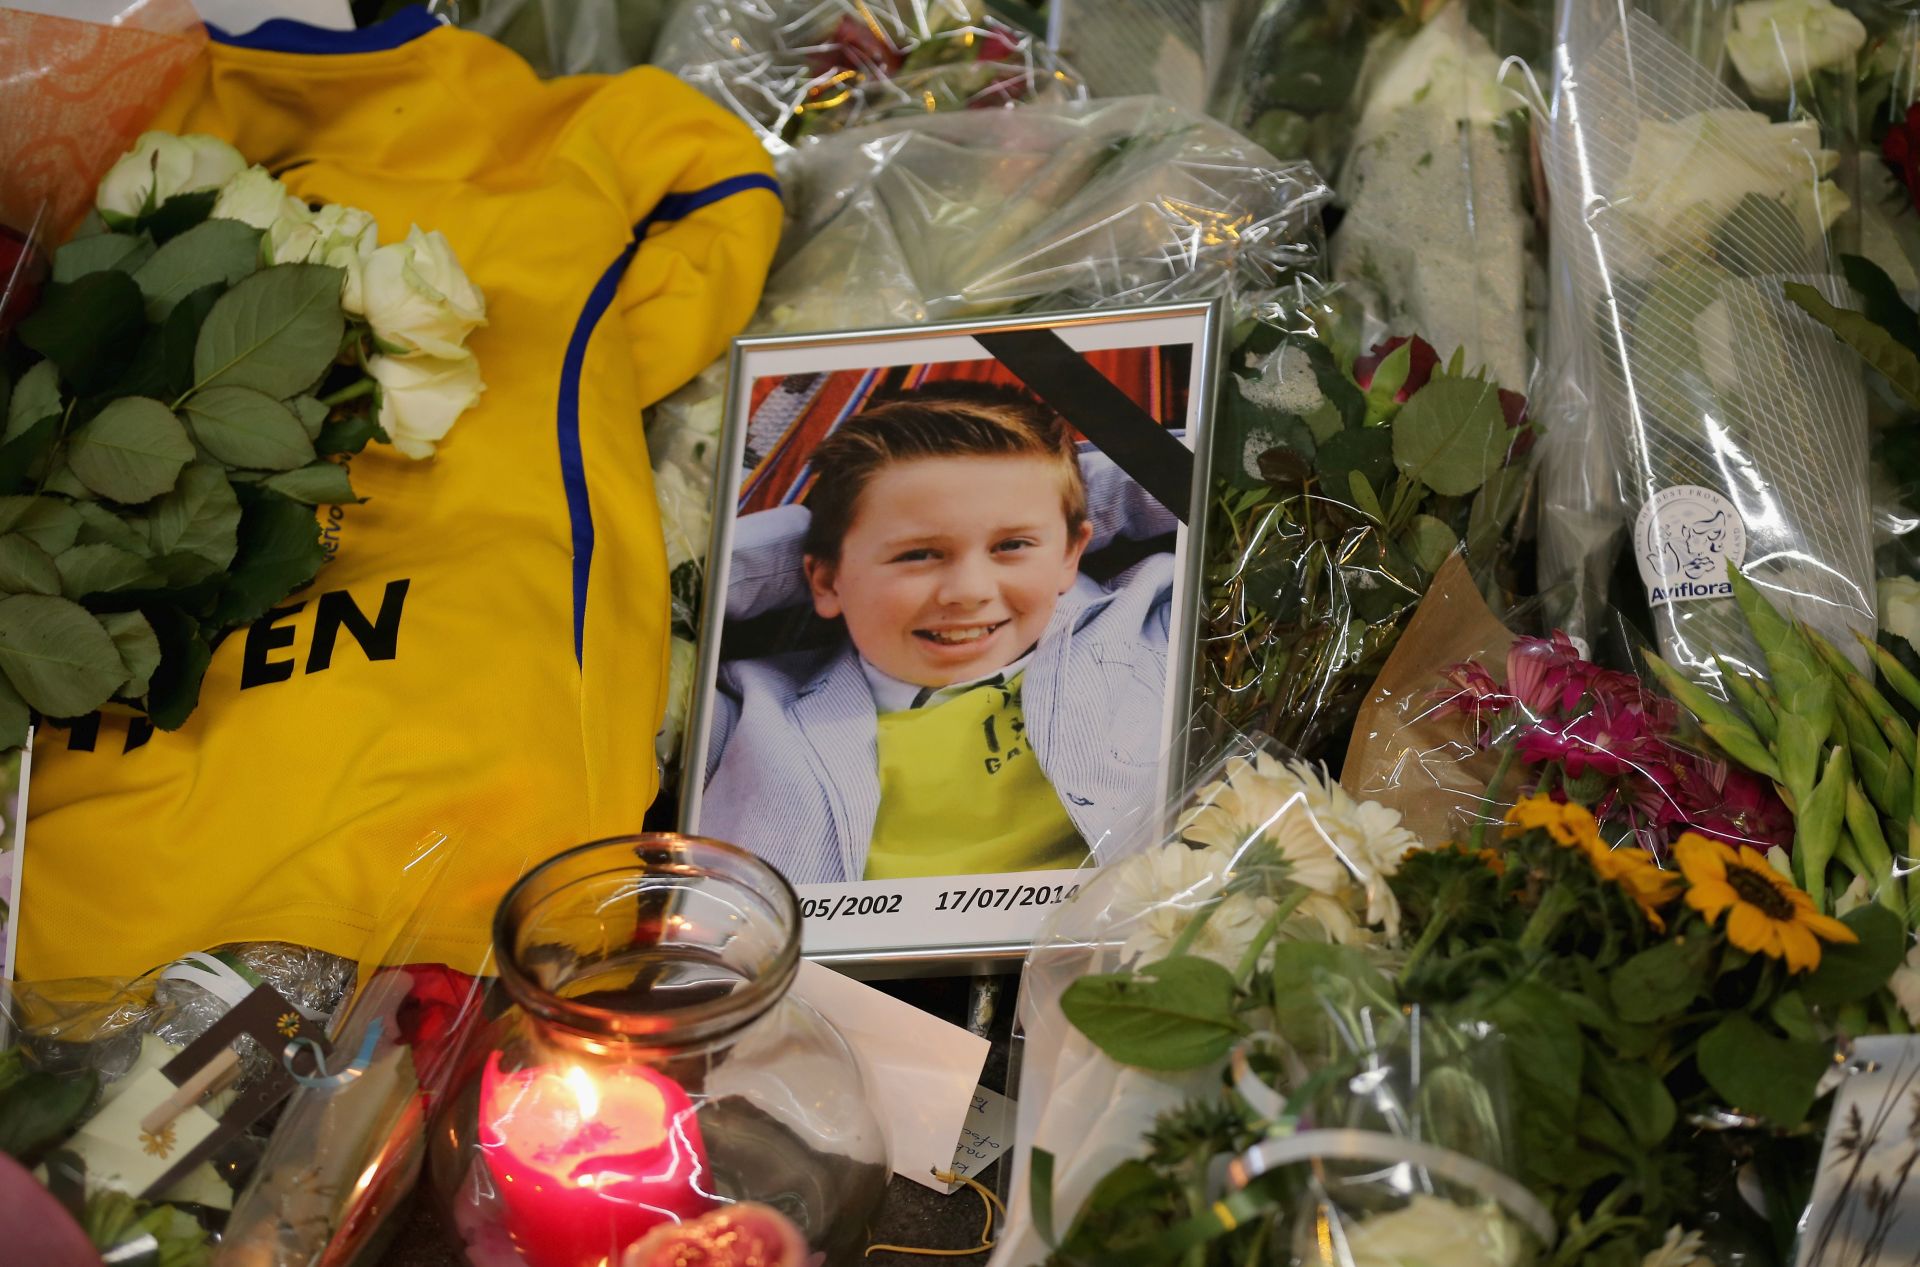 AMSTERDAM, NETHERLANDS - JULY 20:  A photograph of a young boy lies amongst tributes at the entrance to Schiphol Airport which has grown into a sea of flowers in memory of the victims of Malaysia Airlines flight MH17 on July 20, 2014 in Amsterdam, Netherlands.  Malaysian Airlines flight MH17 was travelling from Amsterdam to Kuala Lumpur when it crashed killing all 298 on board including 80 children. The aircraft was allegedly shot down by a missile and investigations continue over the perpetrators of the attack.  (Photo by Christopher Furlong/Getty Images)